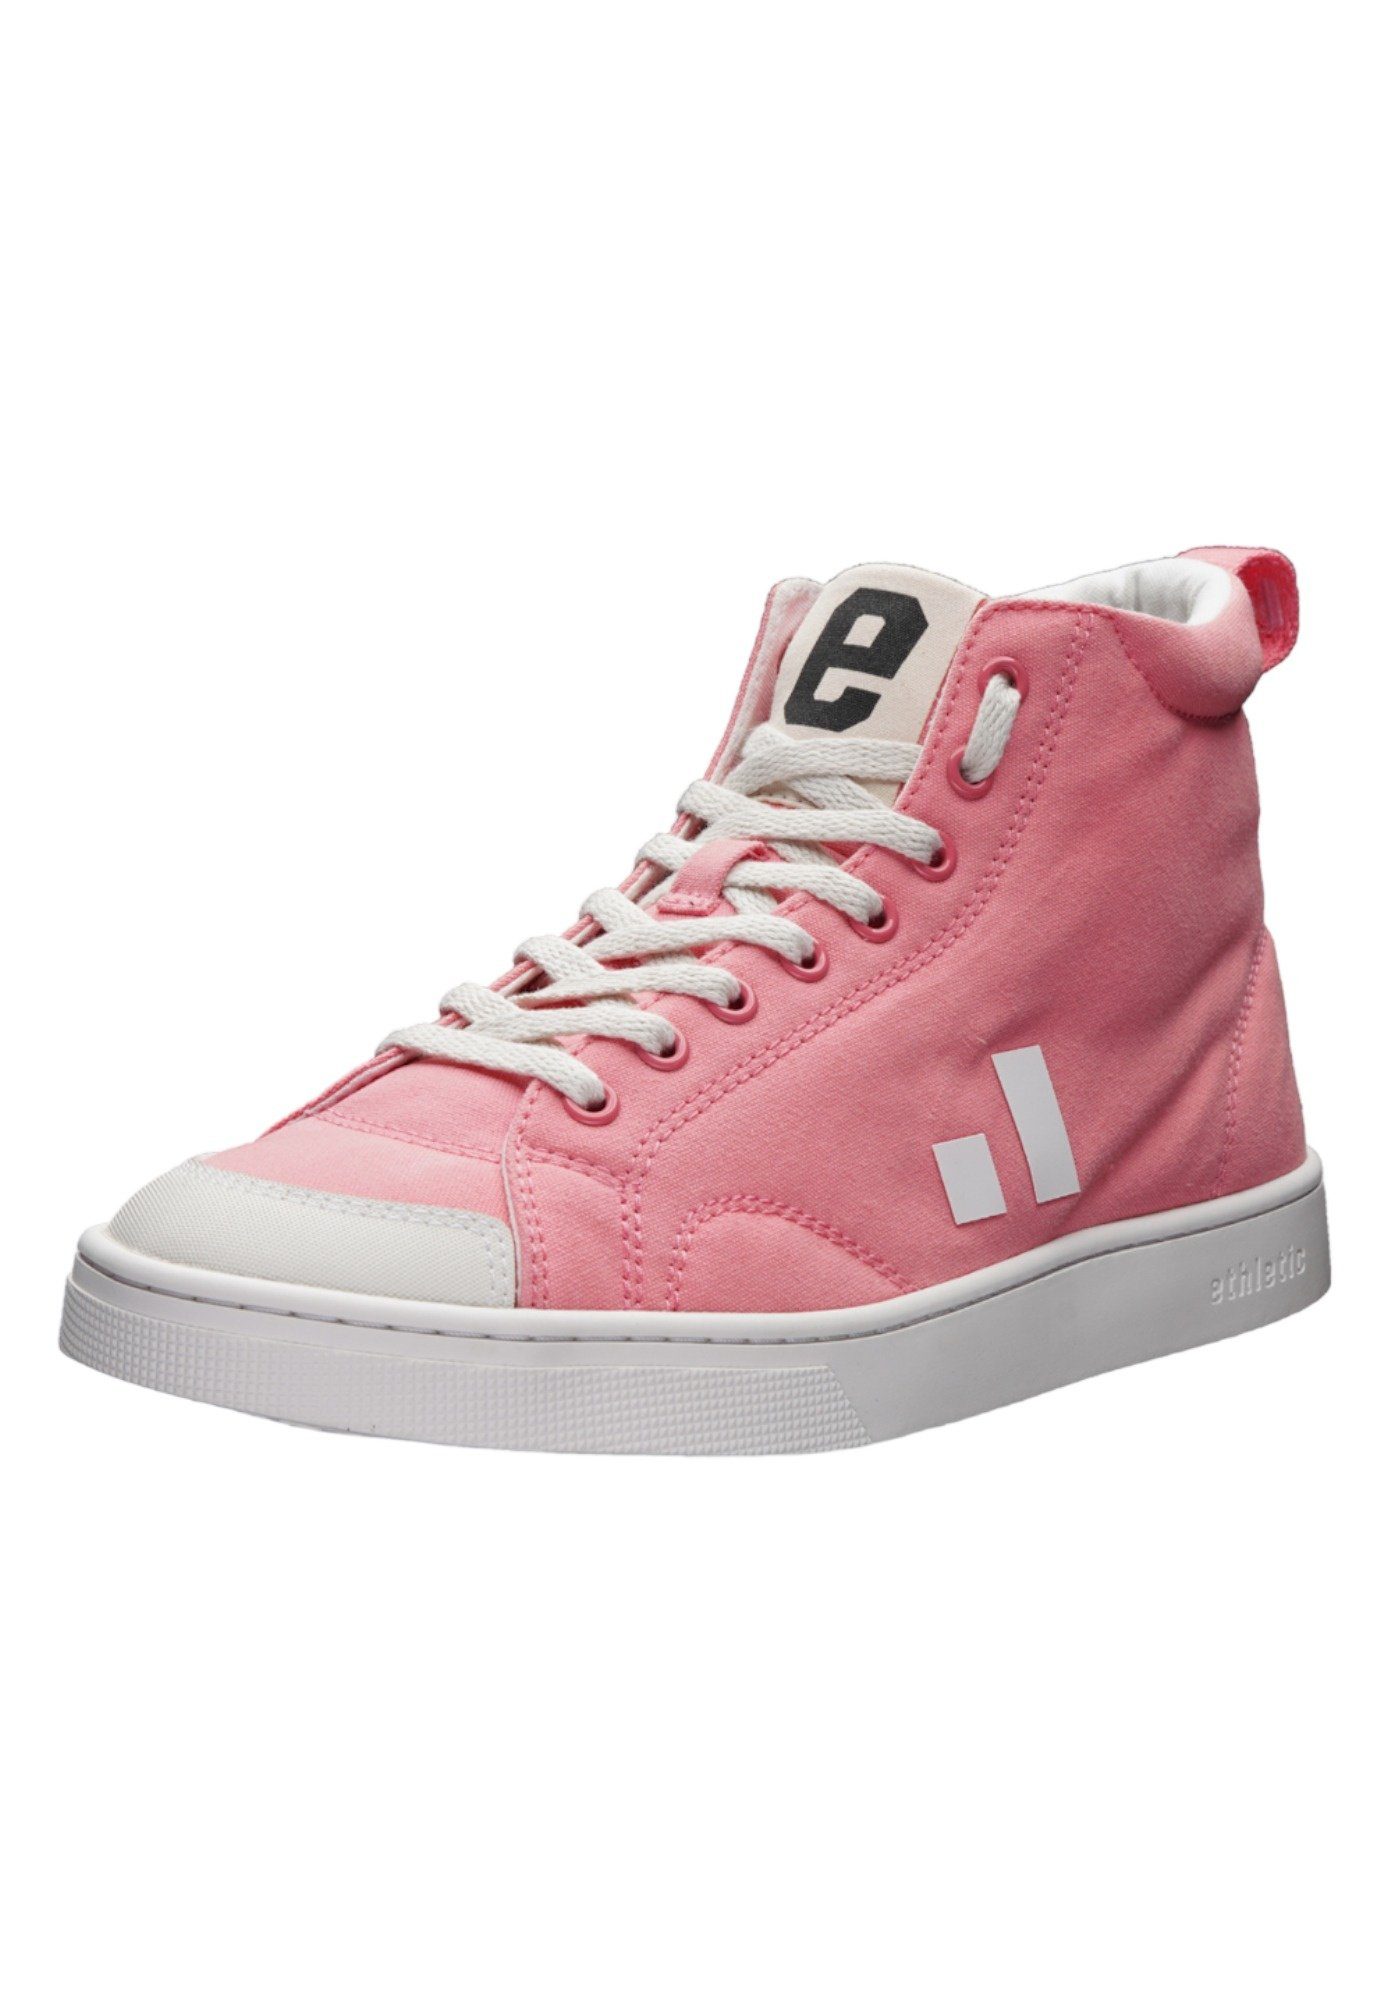 ETHLETIC Active Hi Cut Sneaker Fairtrade Produkt Strawberry Pink - Just White